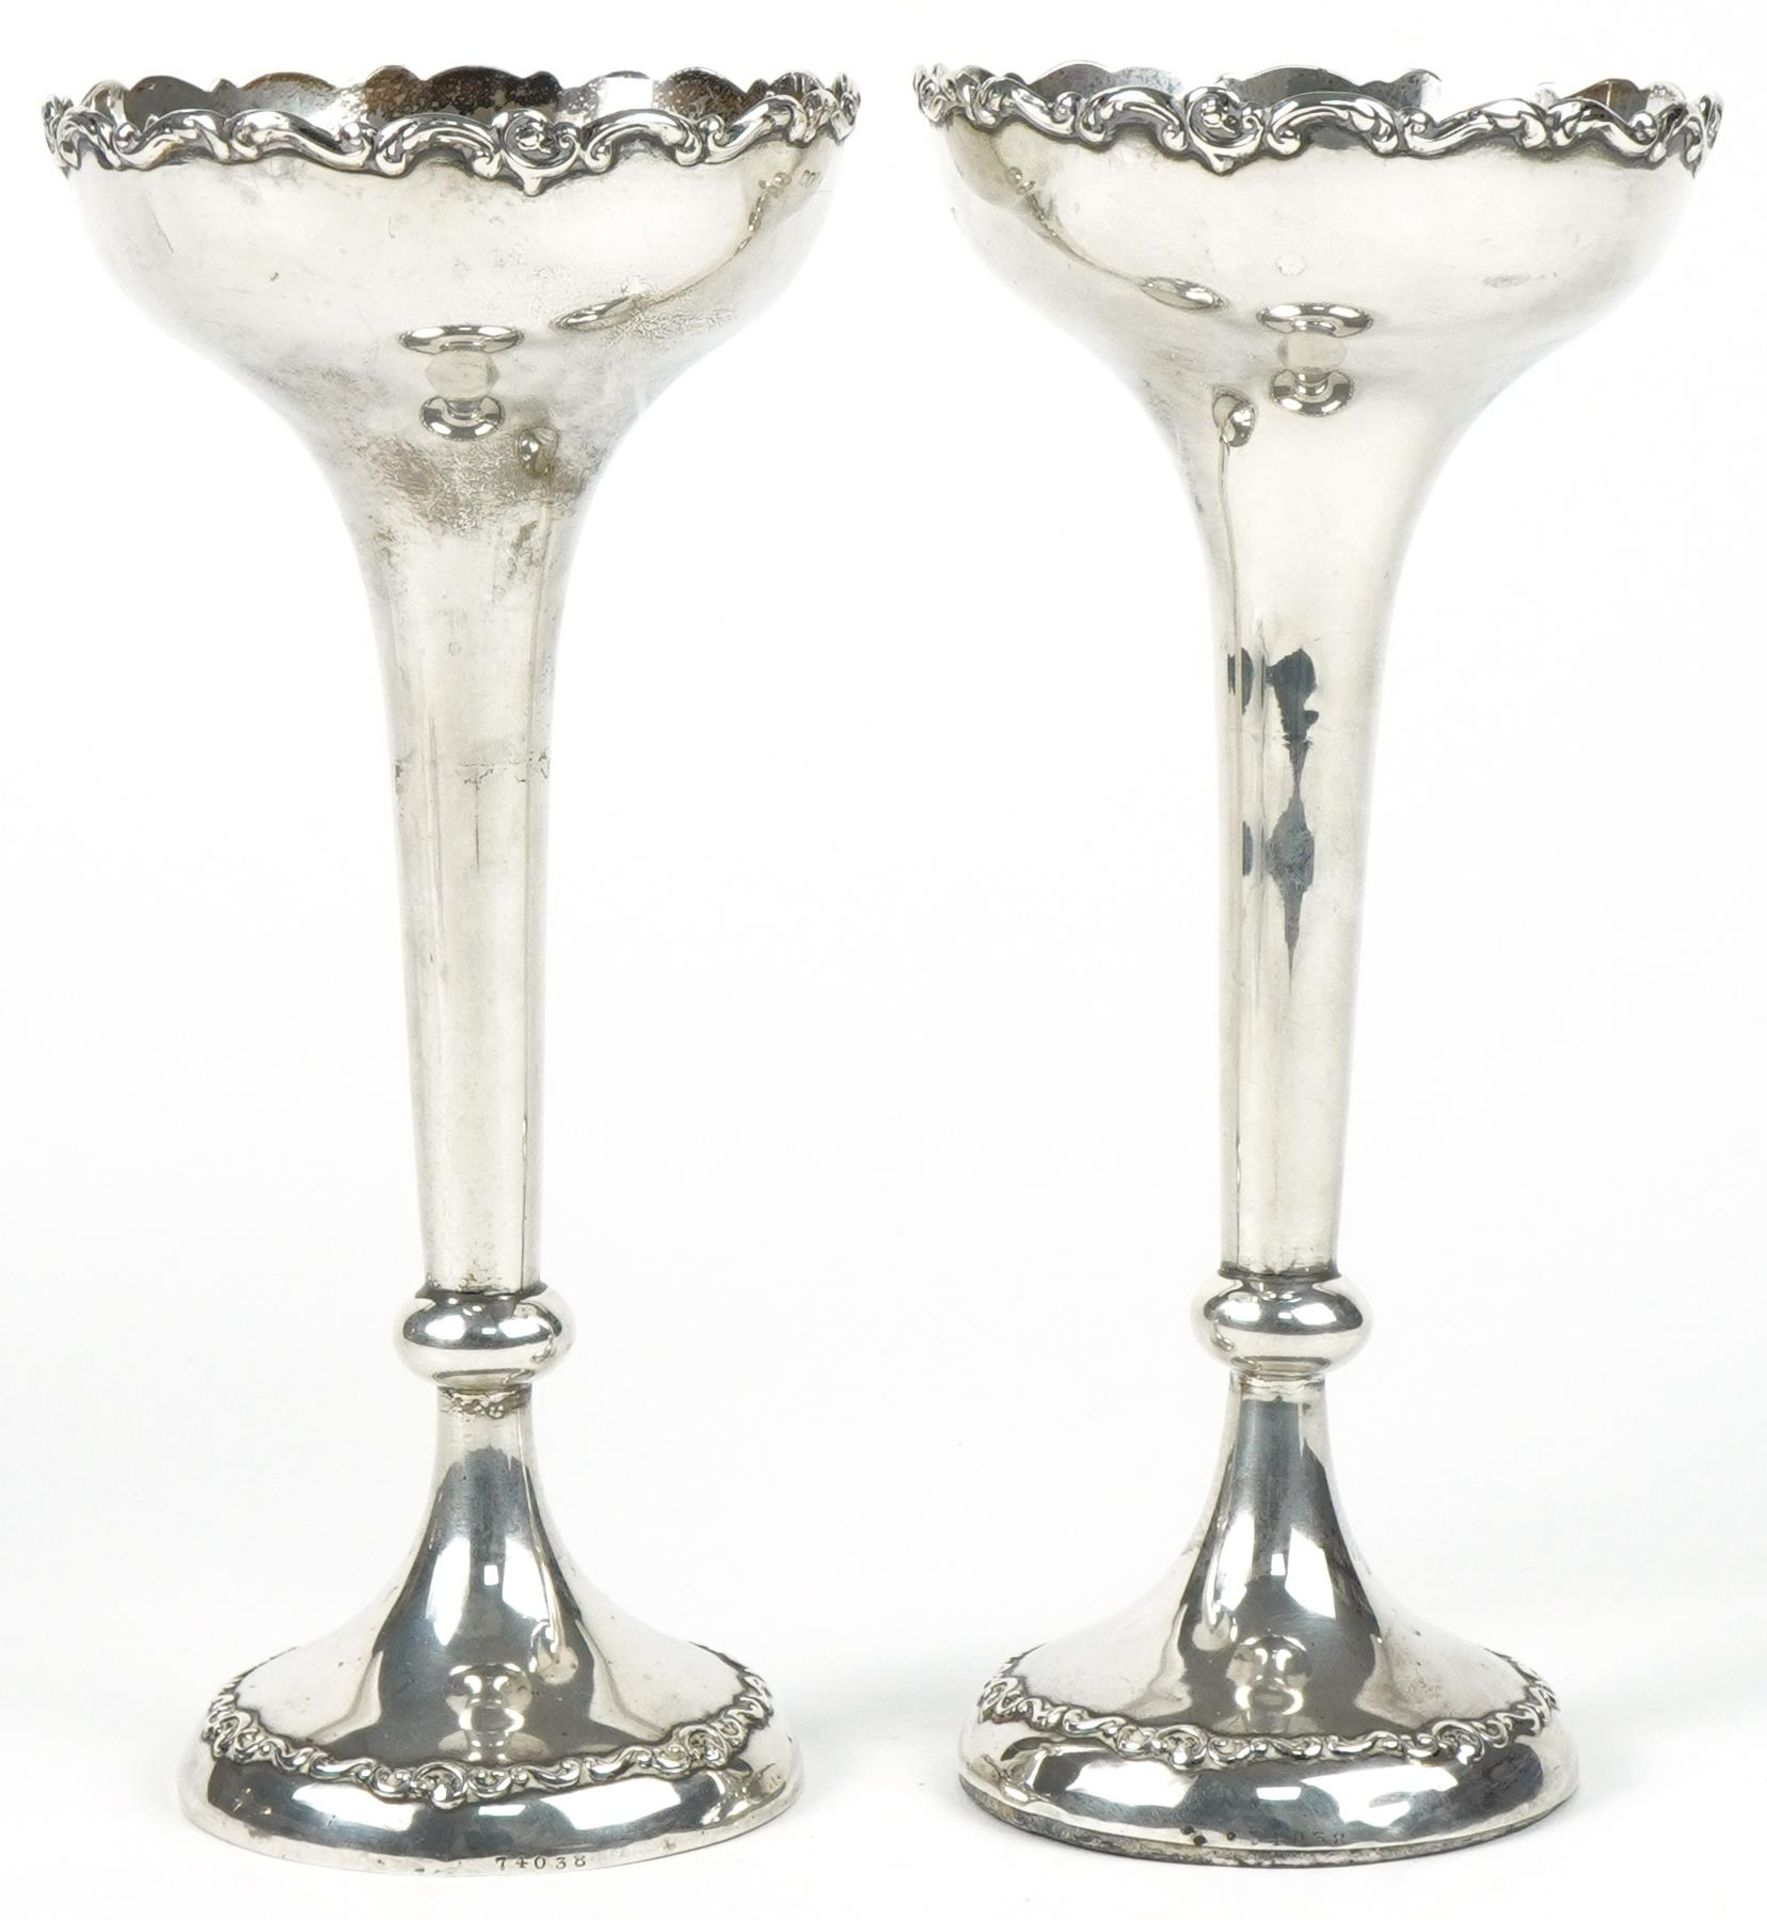 Horace Woodward & Co Ltd, pair of Arts & Crafts weighted silver tapering candlesticks with foliate